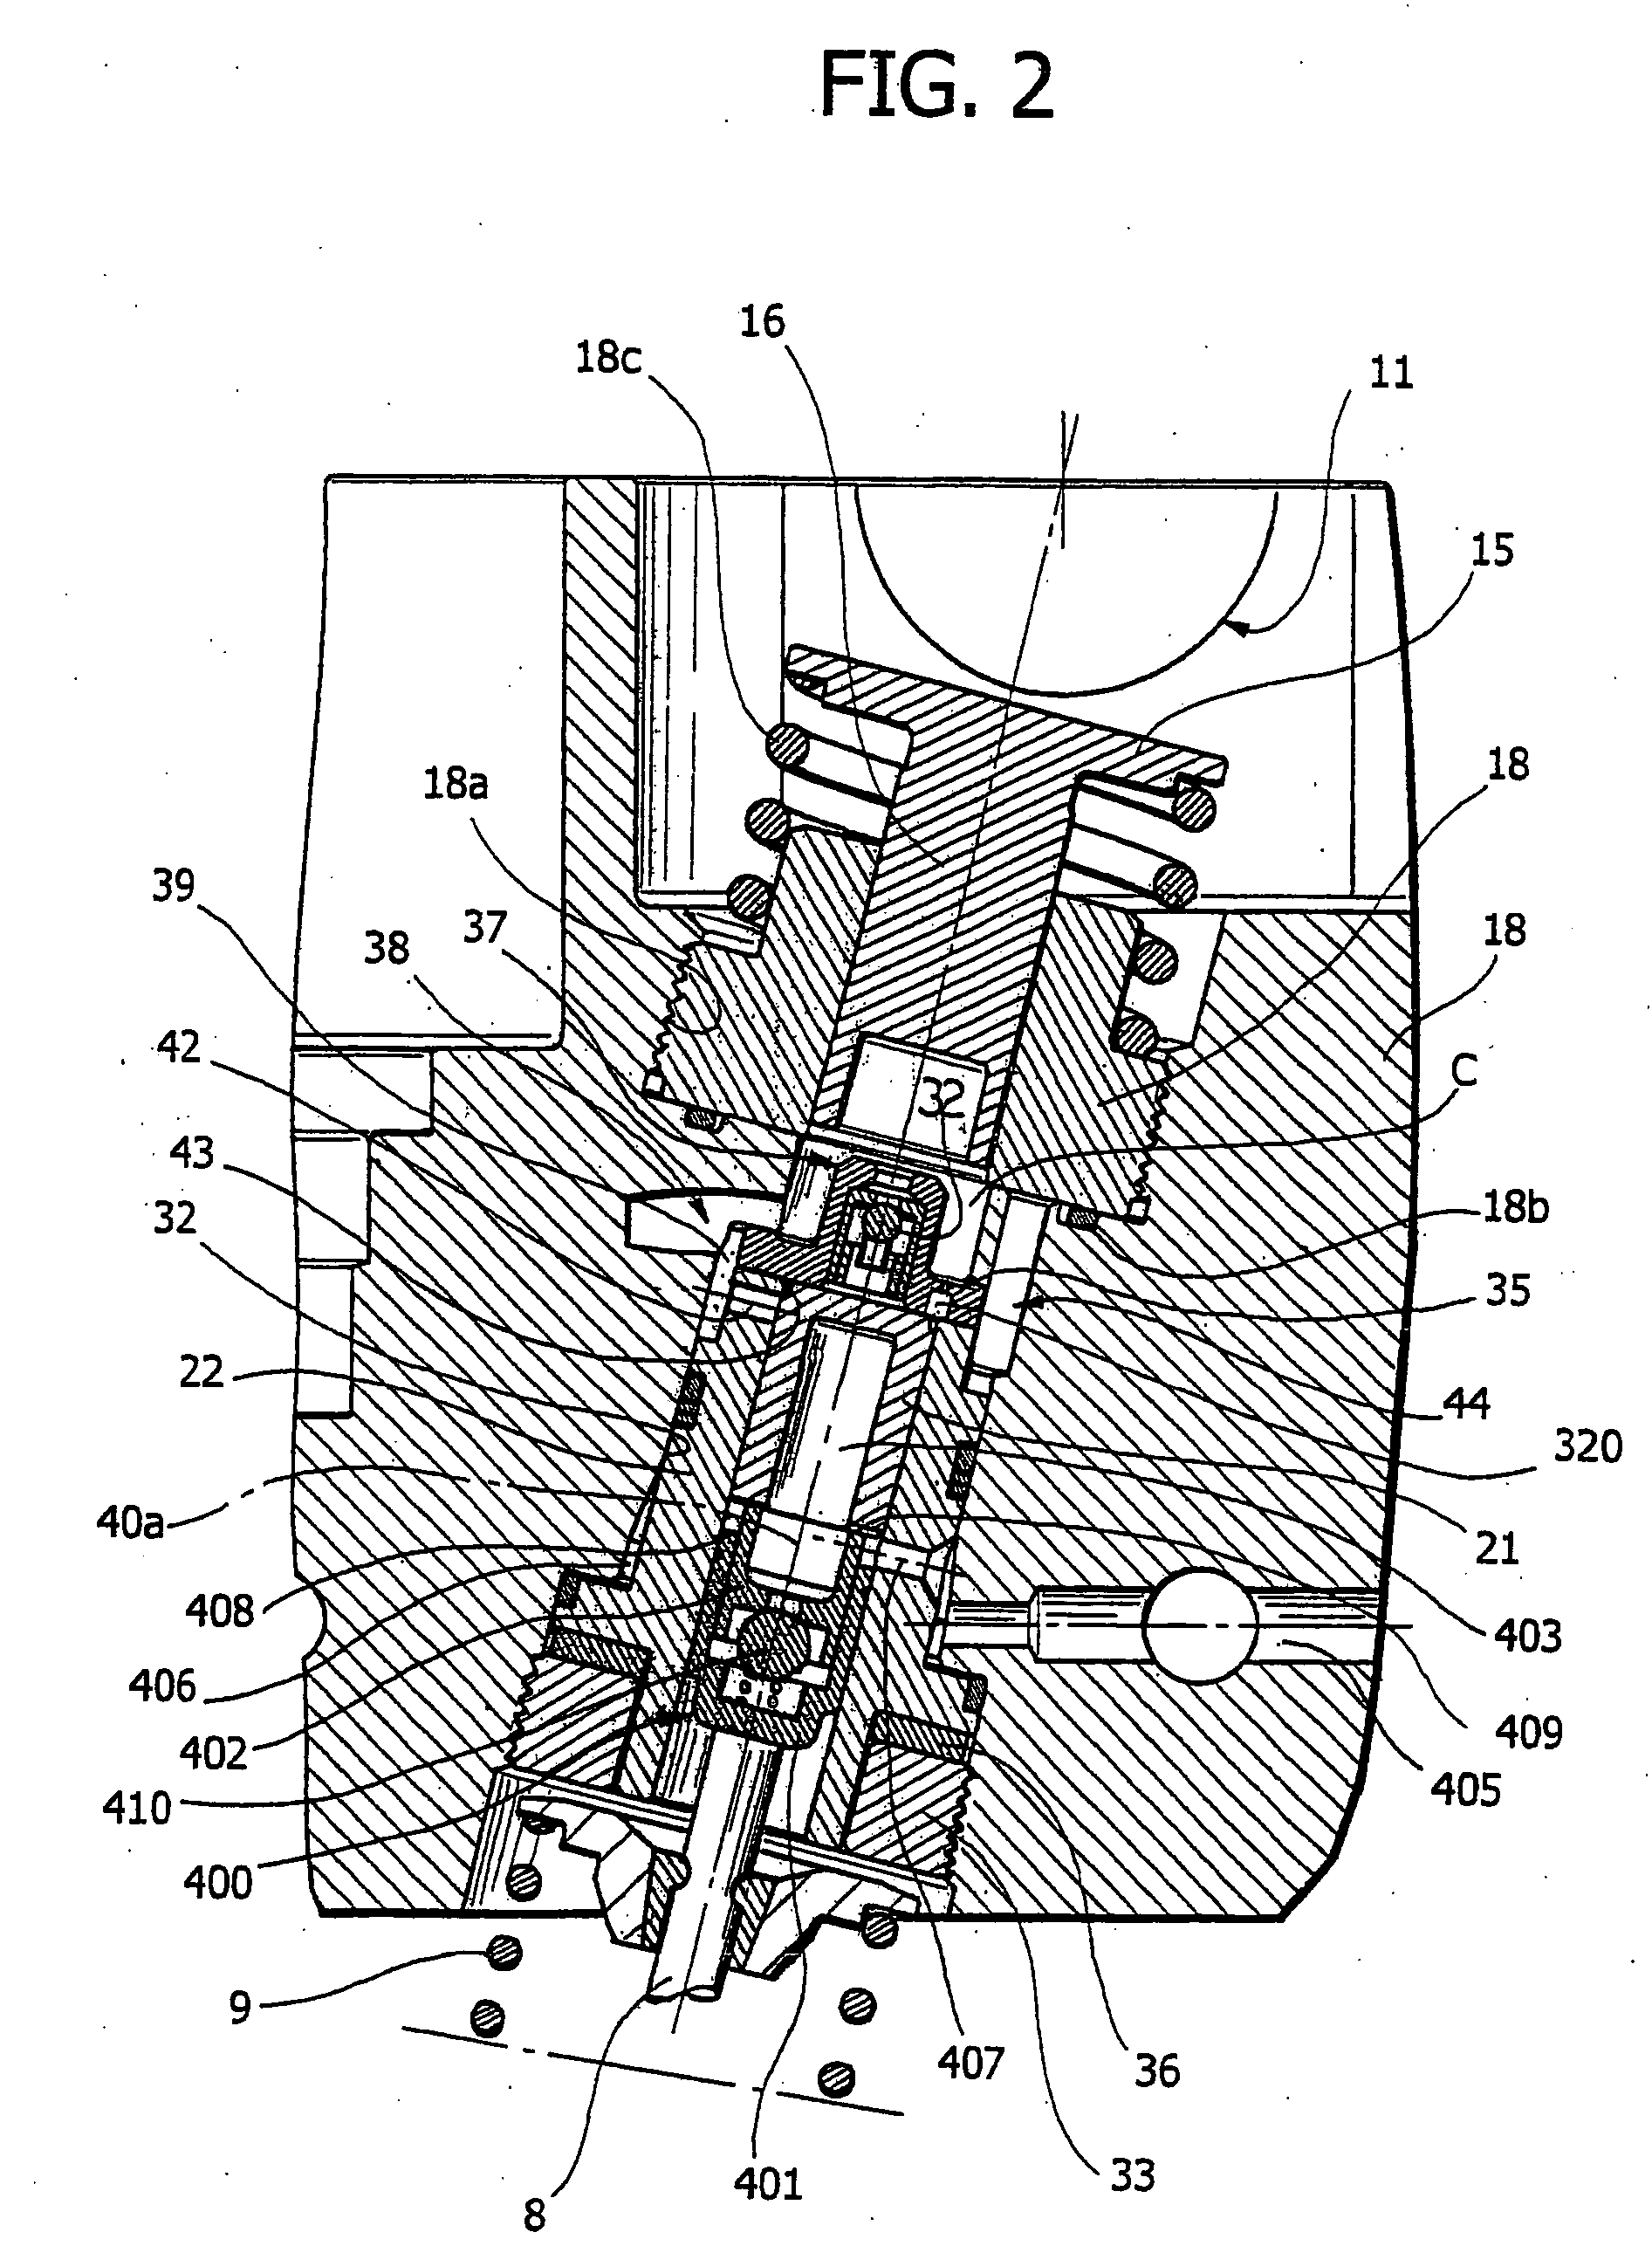 Internal combustion engine with valves with variable actuation which are driven by a single pumping piston and controlled by a single solenoid valve for each engine cylinder